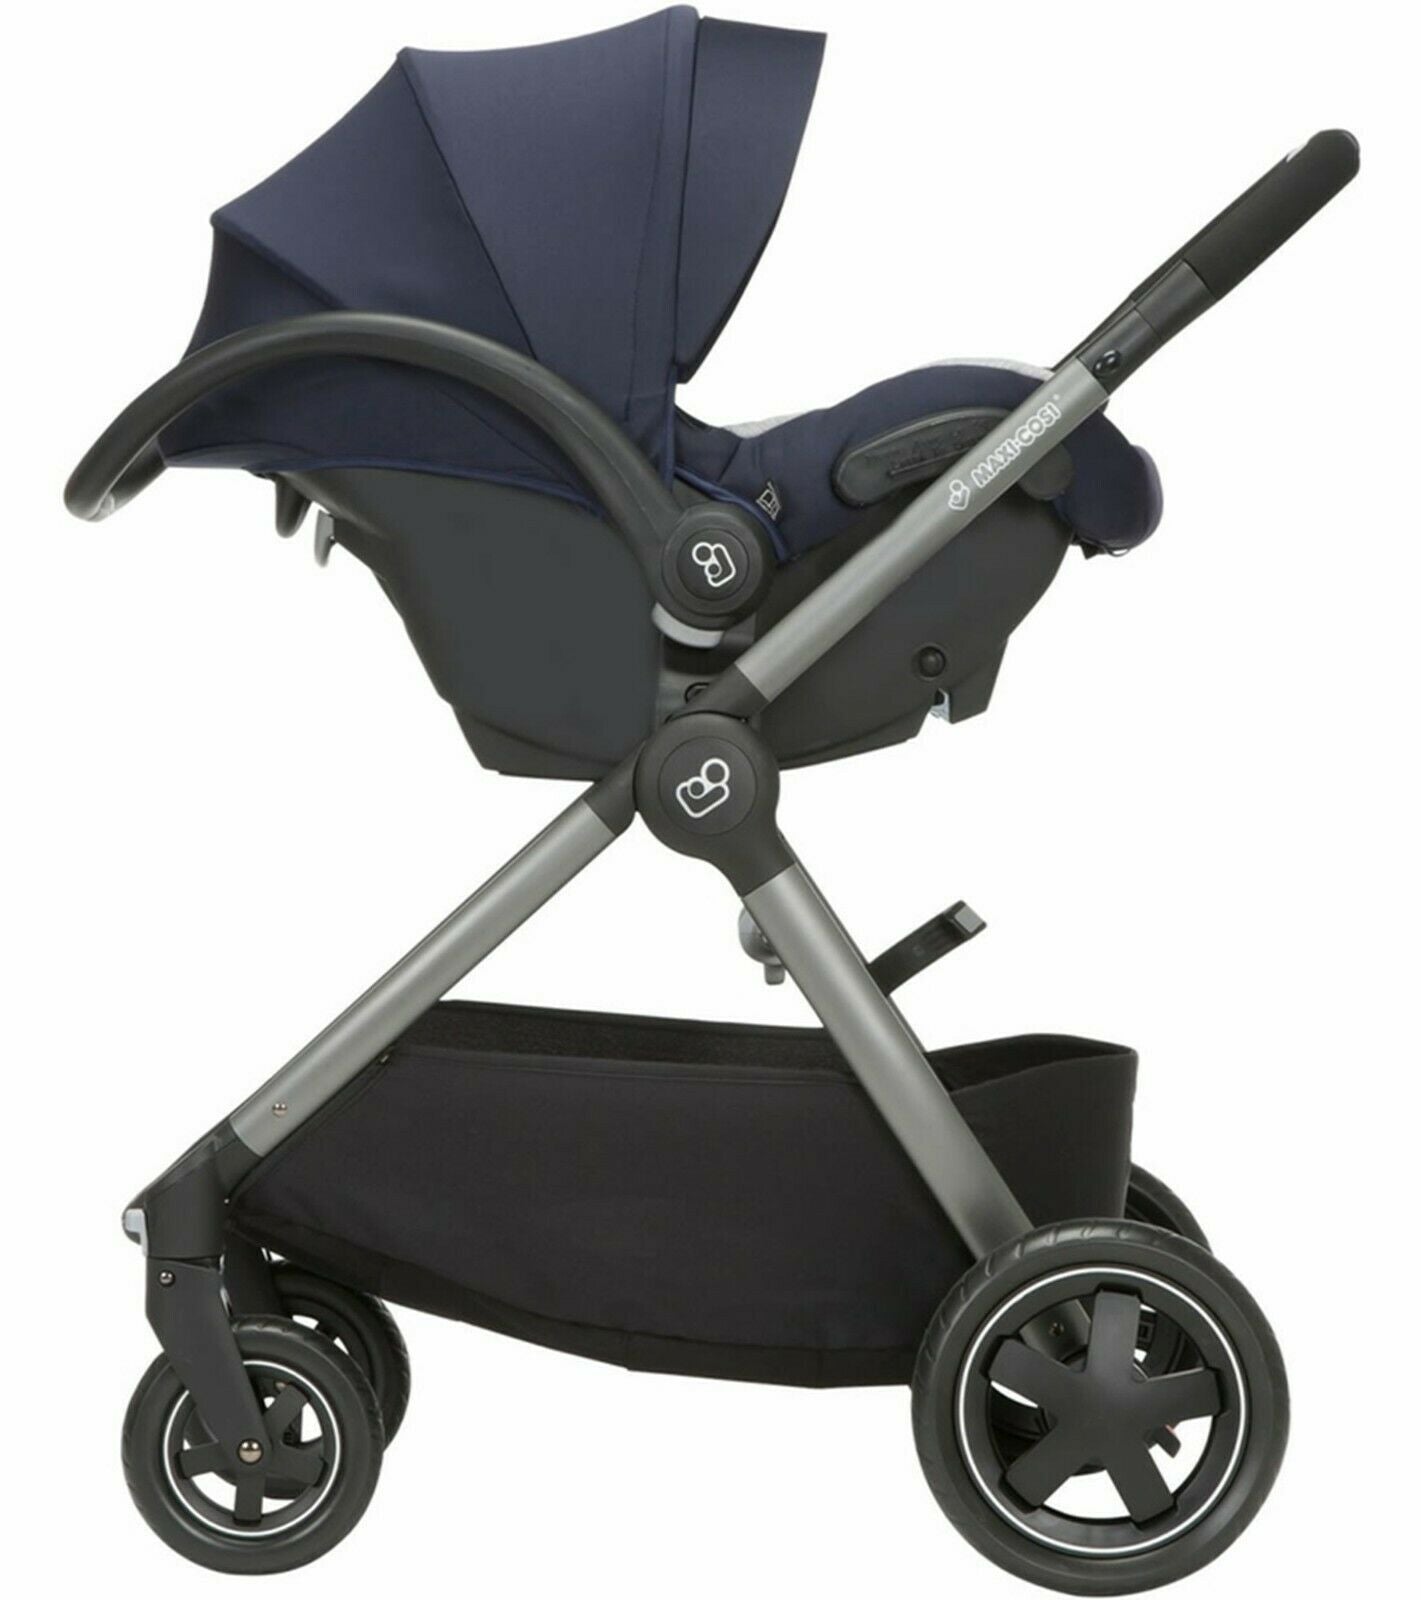 Maxi-Cosi Adorra Travel System Baby Stroller with Mico Max Infant Car Seat Blue